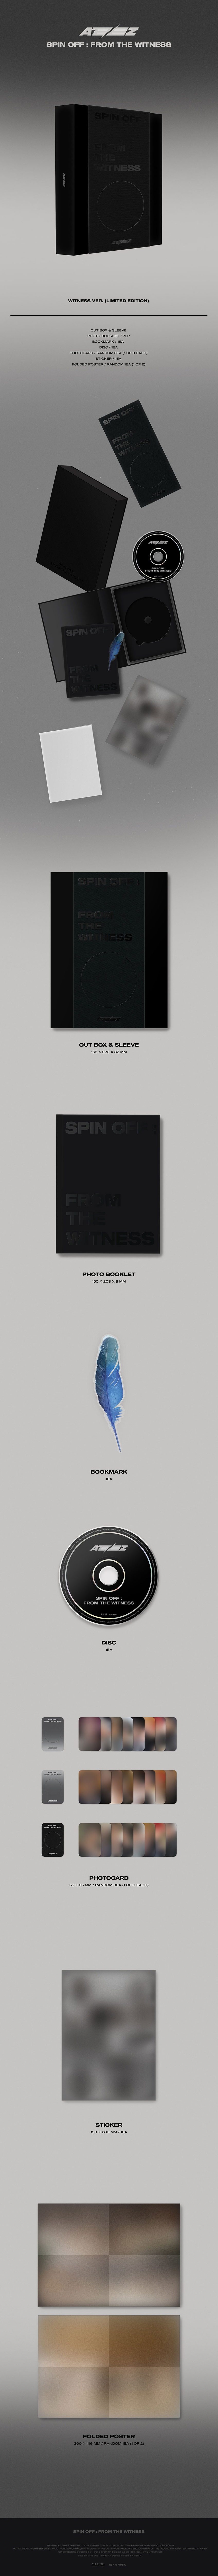 ATEEZ - SPIN OFF: FROM THE WITNESS (Witness Ver.) Limited Edition | The Daebak Company